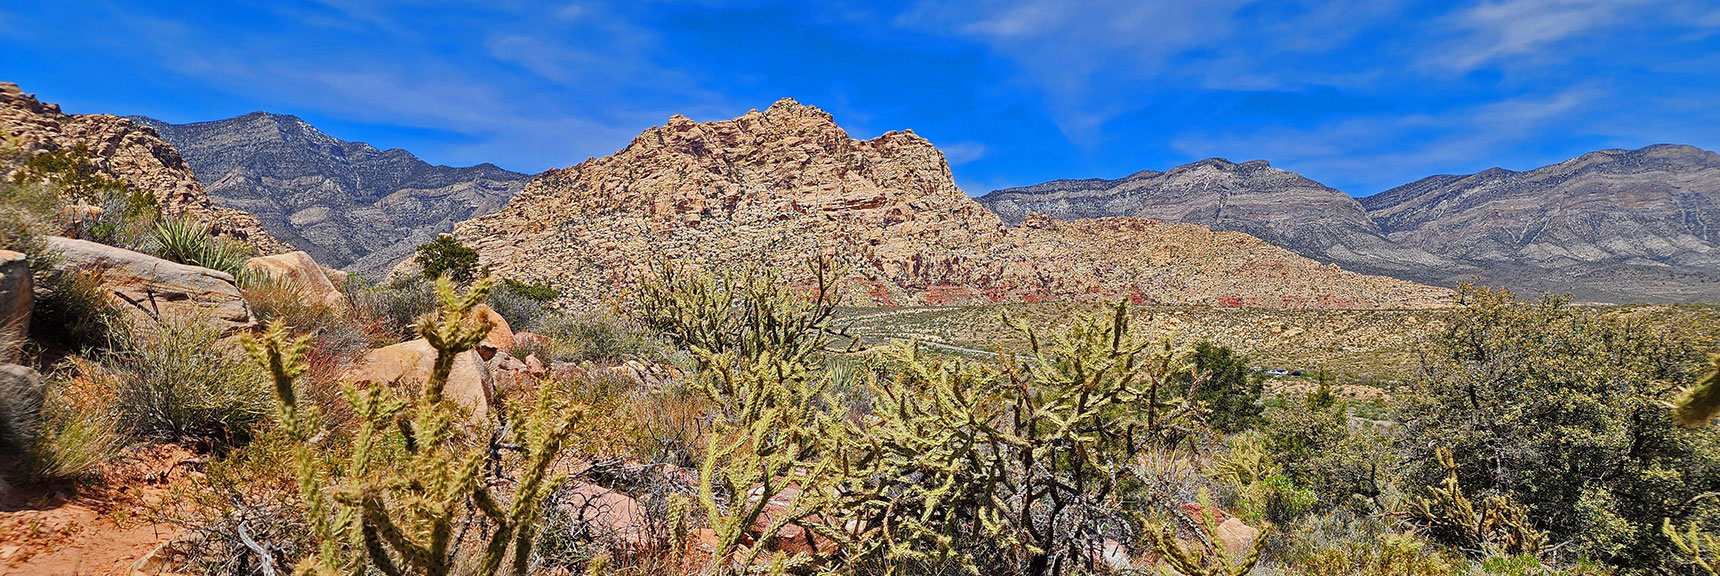 View Back to White Rock Mountain While Returning South on Dales Trail | Dales Trail | Red Rock Canyon National Conservation Area, Nevada | David Smith | LasVegasAreaTrails.com